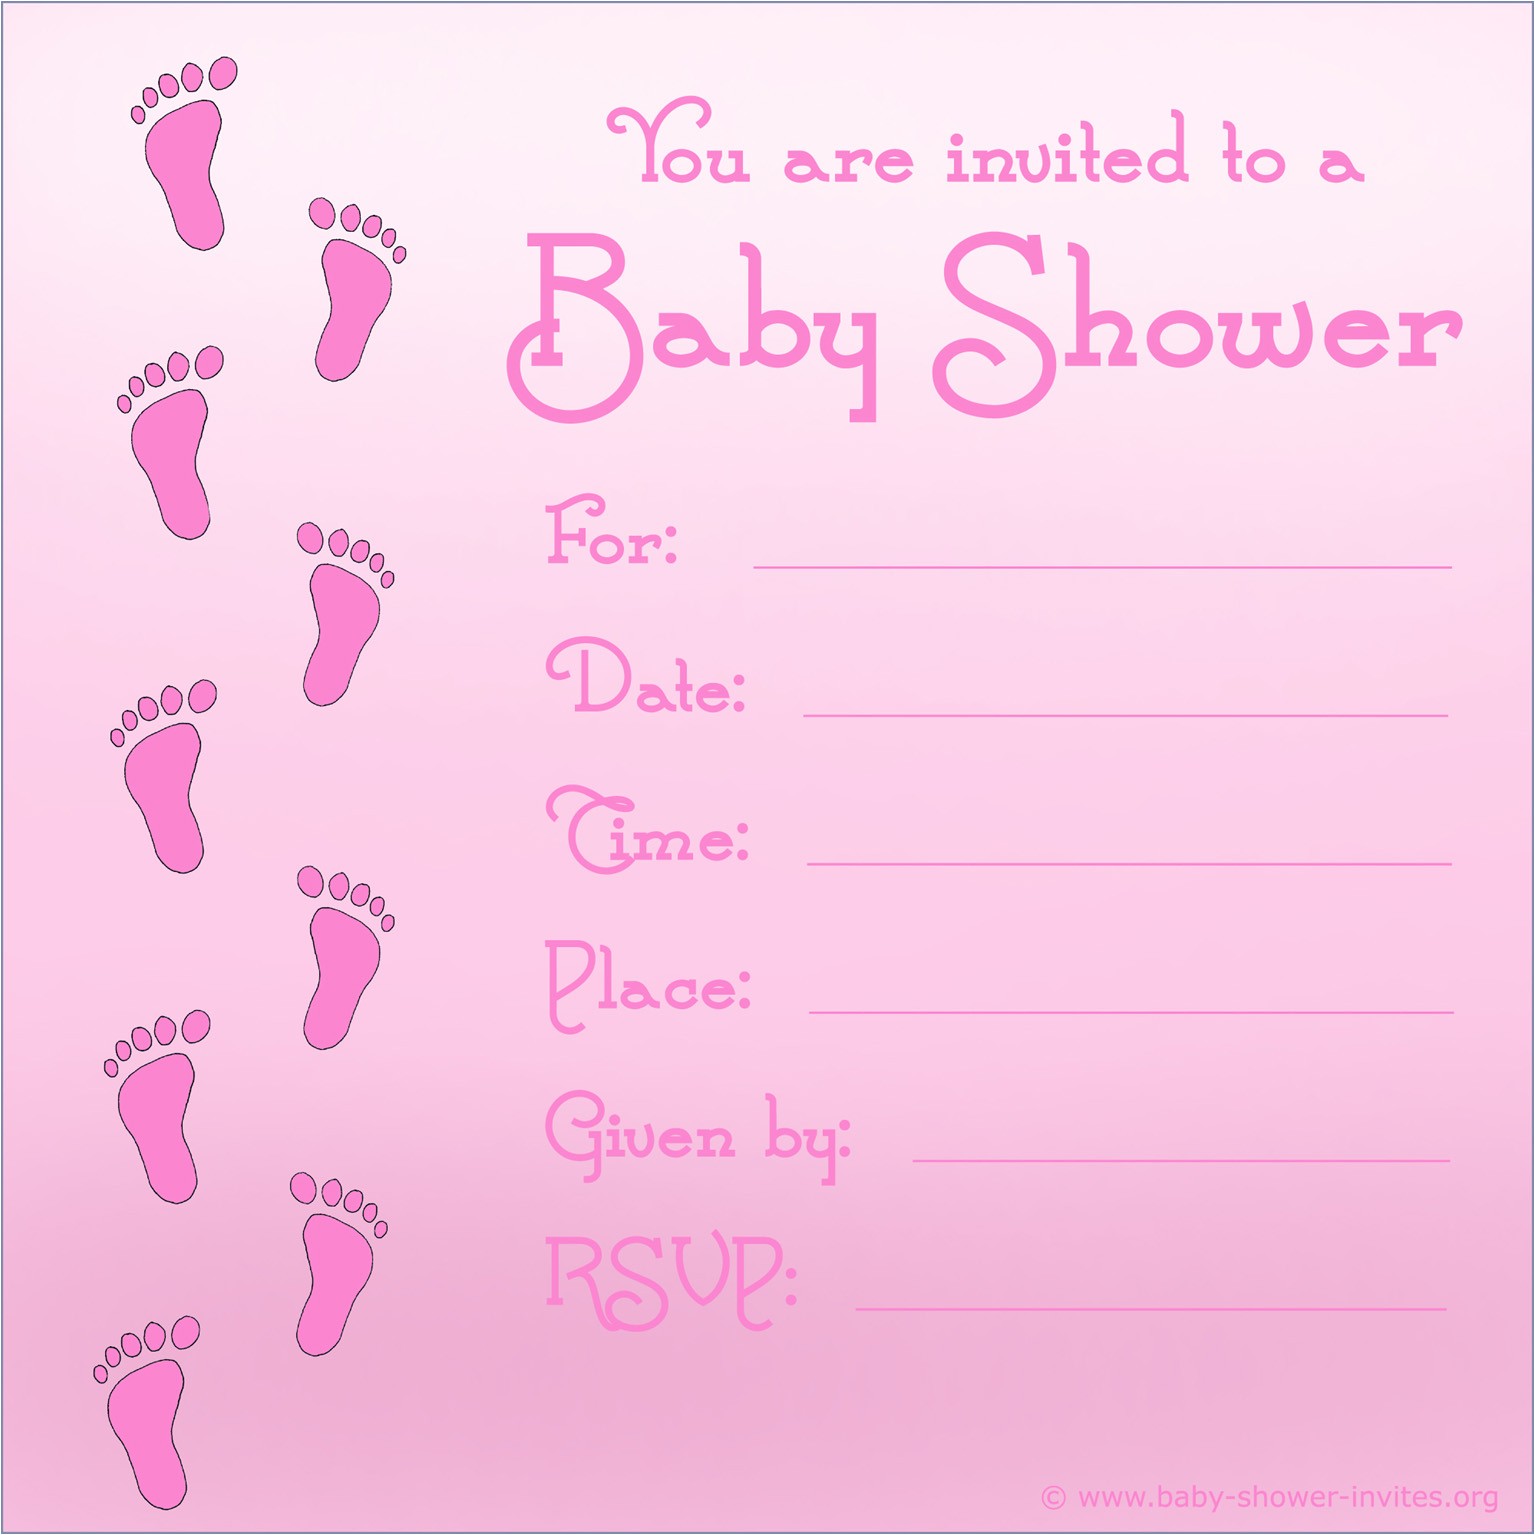 Create Your Own Free Printable Baby Shower Invitations Free Printable Baby Shower Invitations for Girls